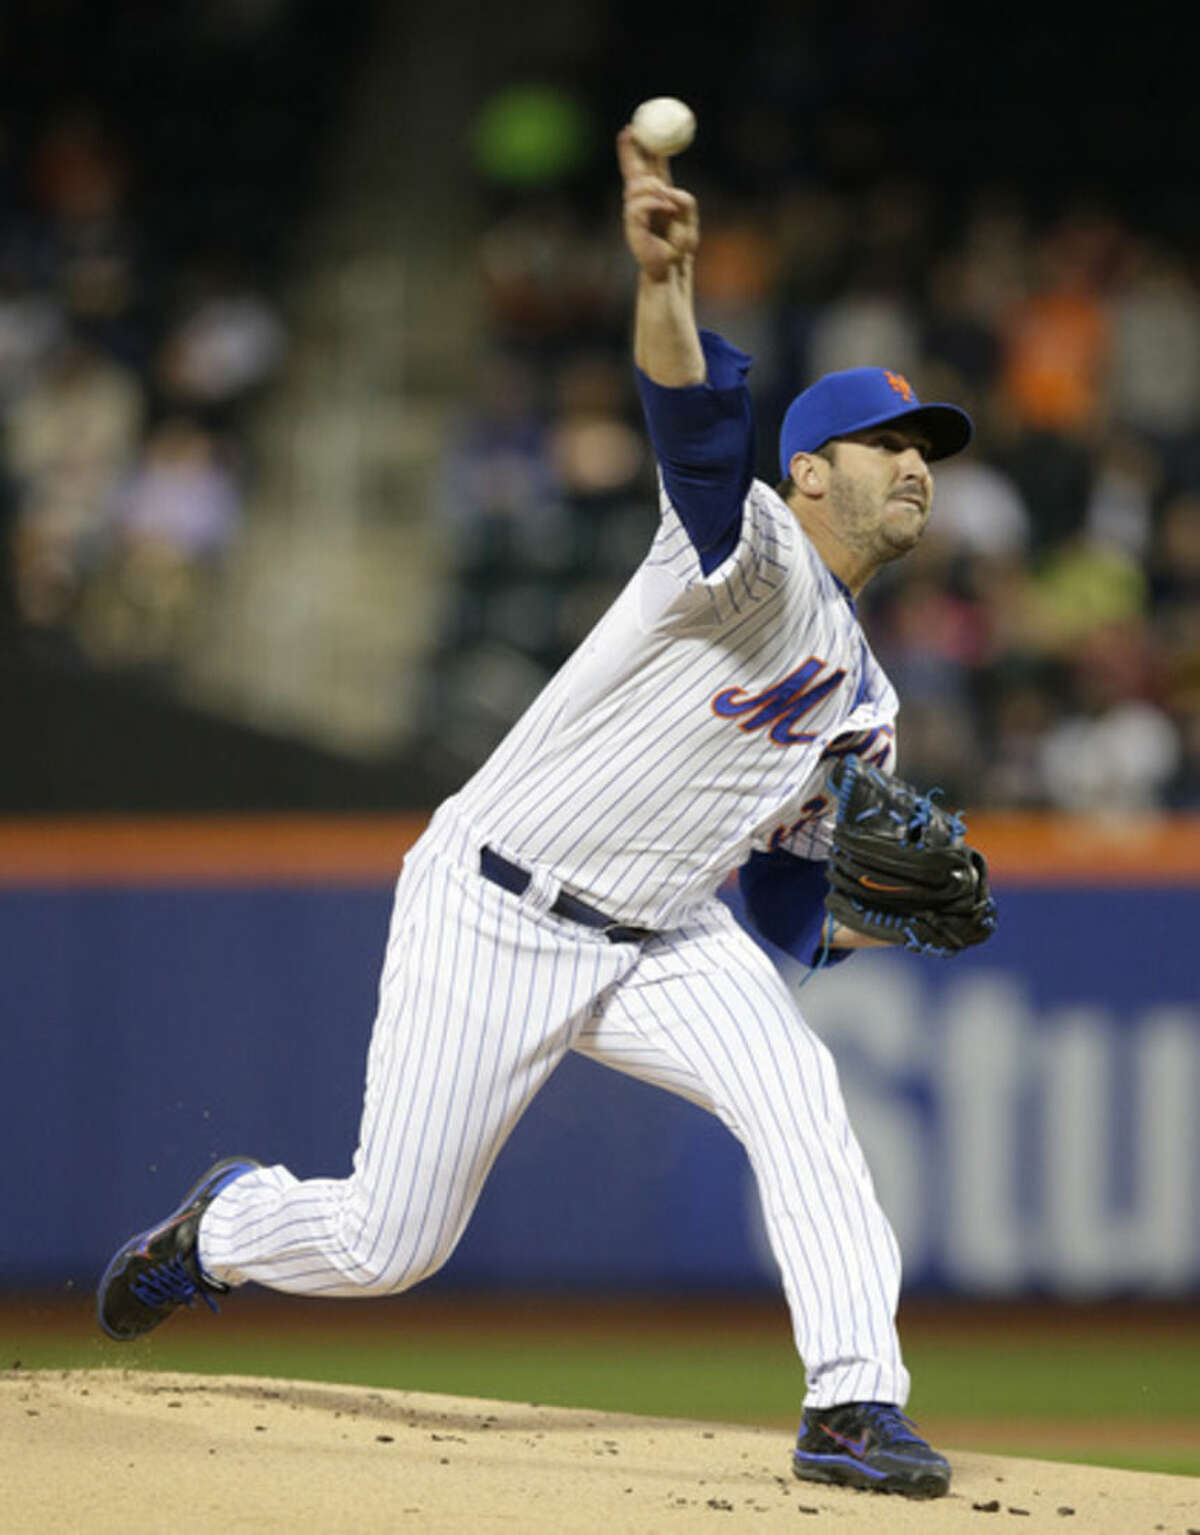 New York Mets starting pitcher Matt Harvey delivers in the first inning of a baseball game against the Philadelphia Phillies in New York, Tuesday, April 14, 2015. (AP Photo/Kathy Willens)